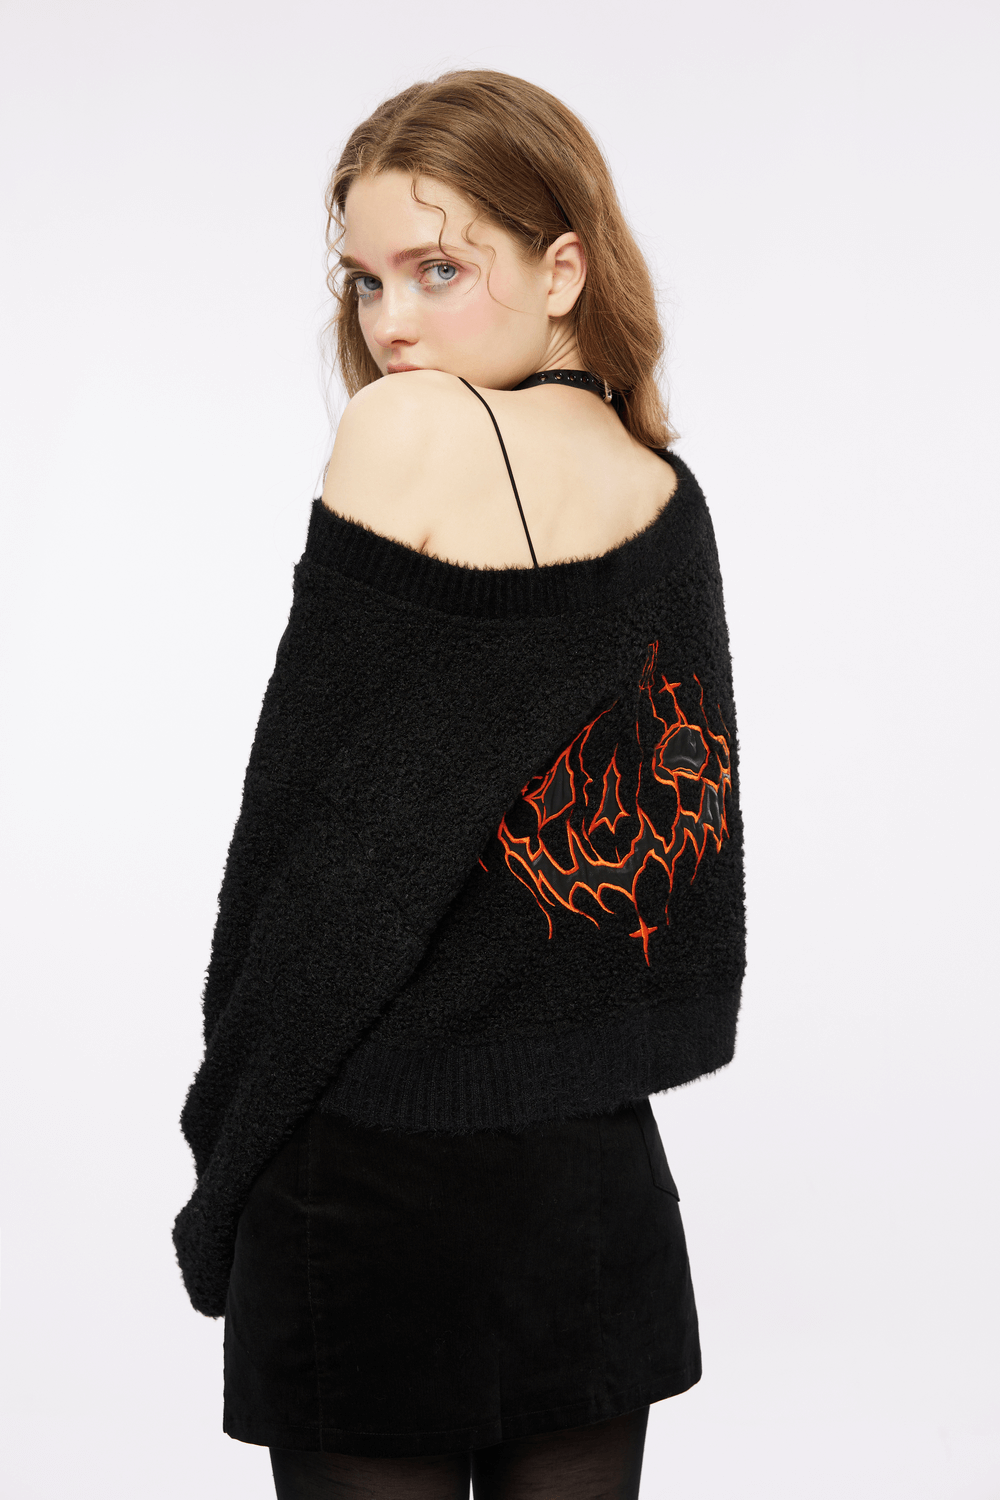 Punk Rave Black Flame Embroidered Crop Sweater